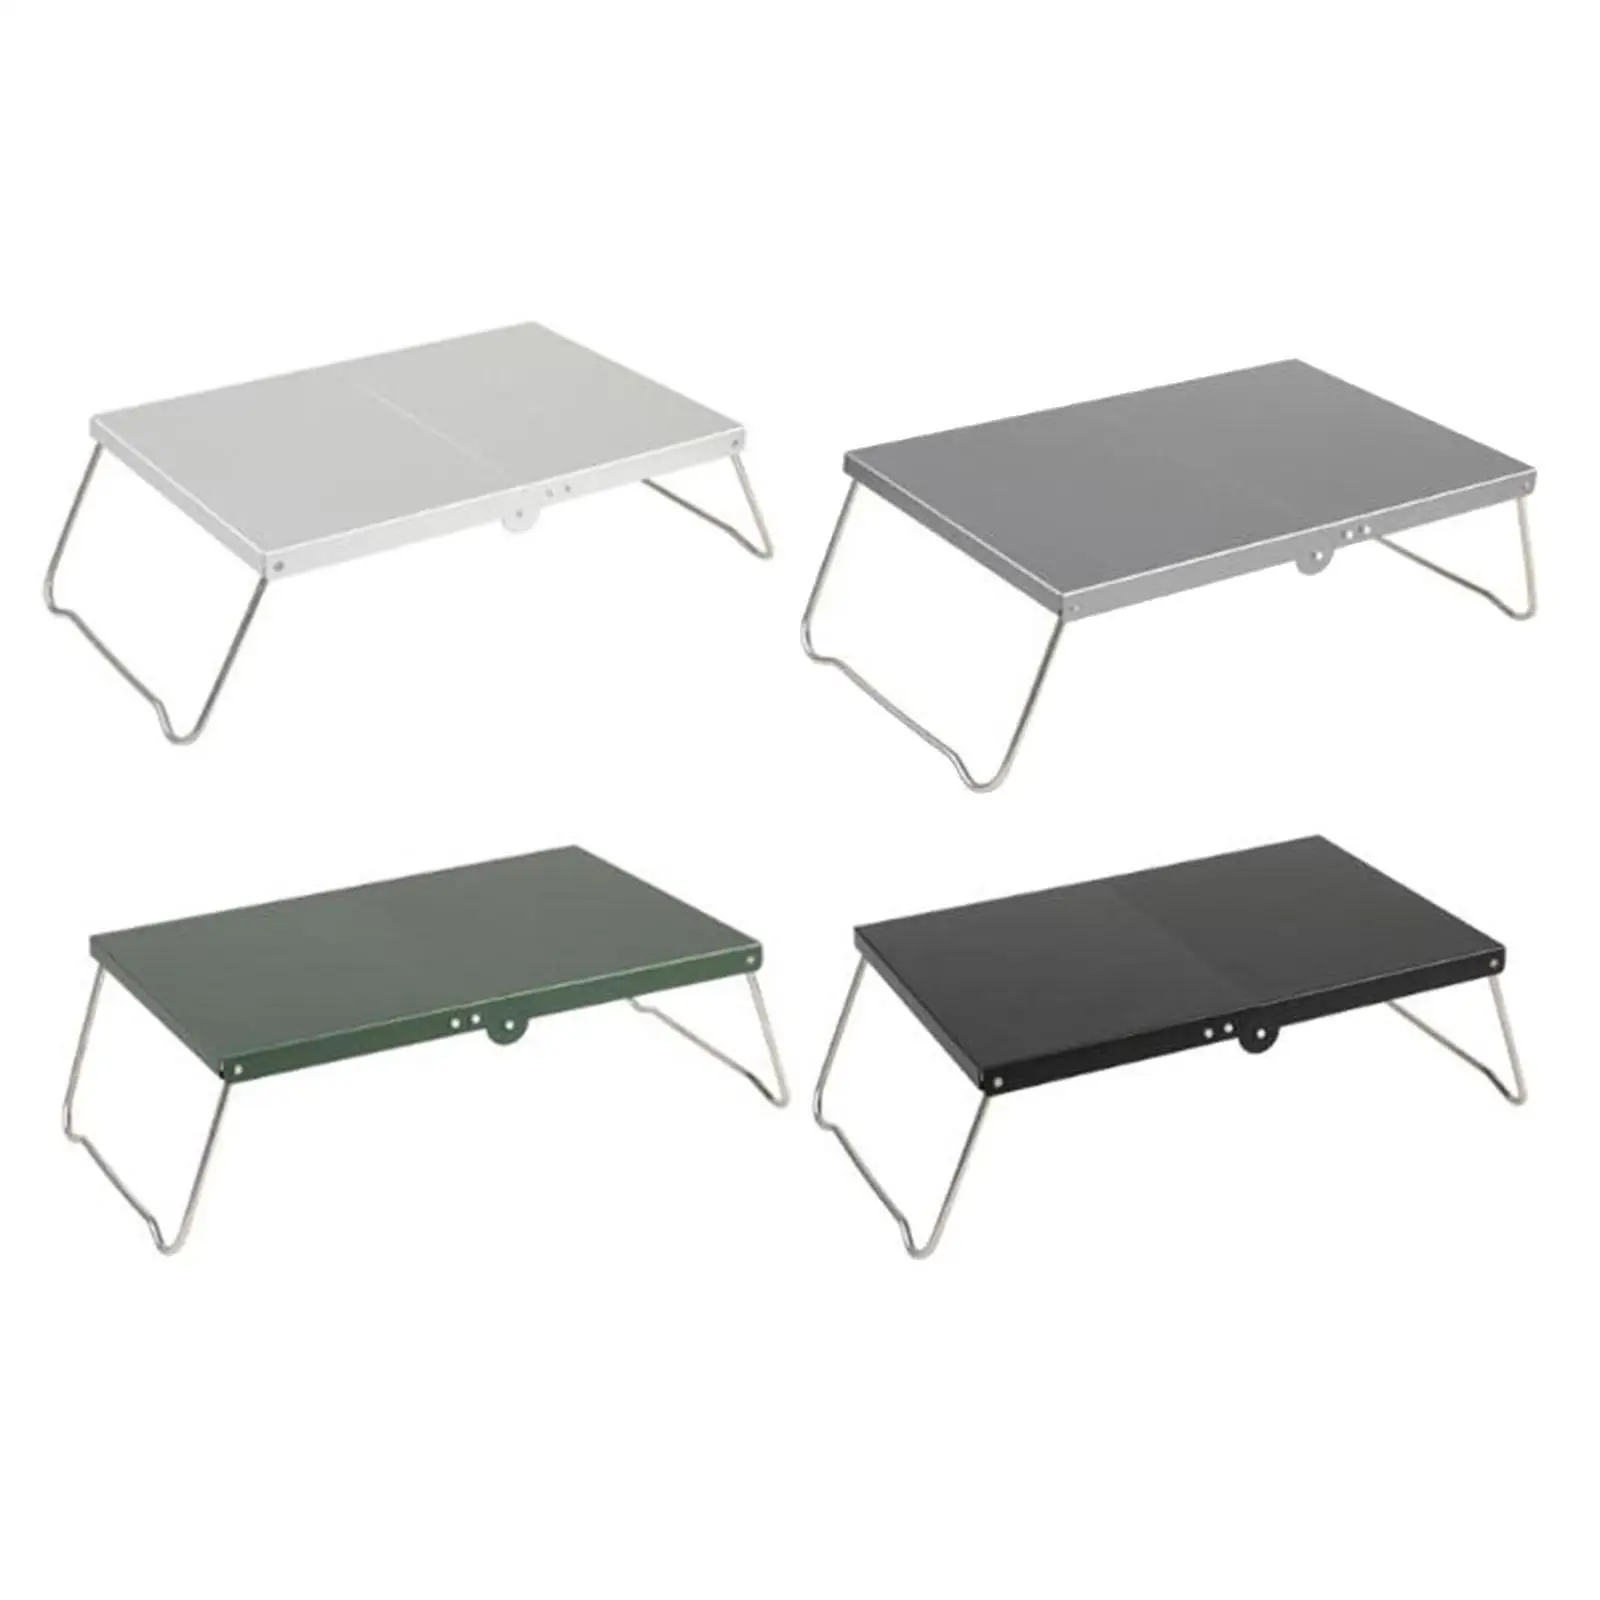 Camping Folding Table Stable Aluminum Alloy for Hiking Backpacking Barbecue